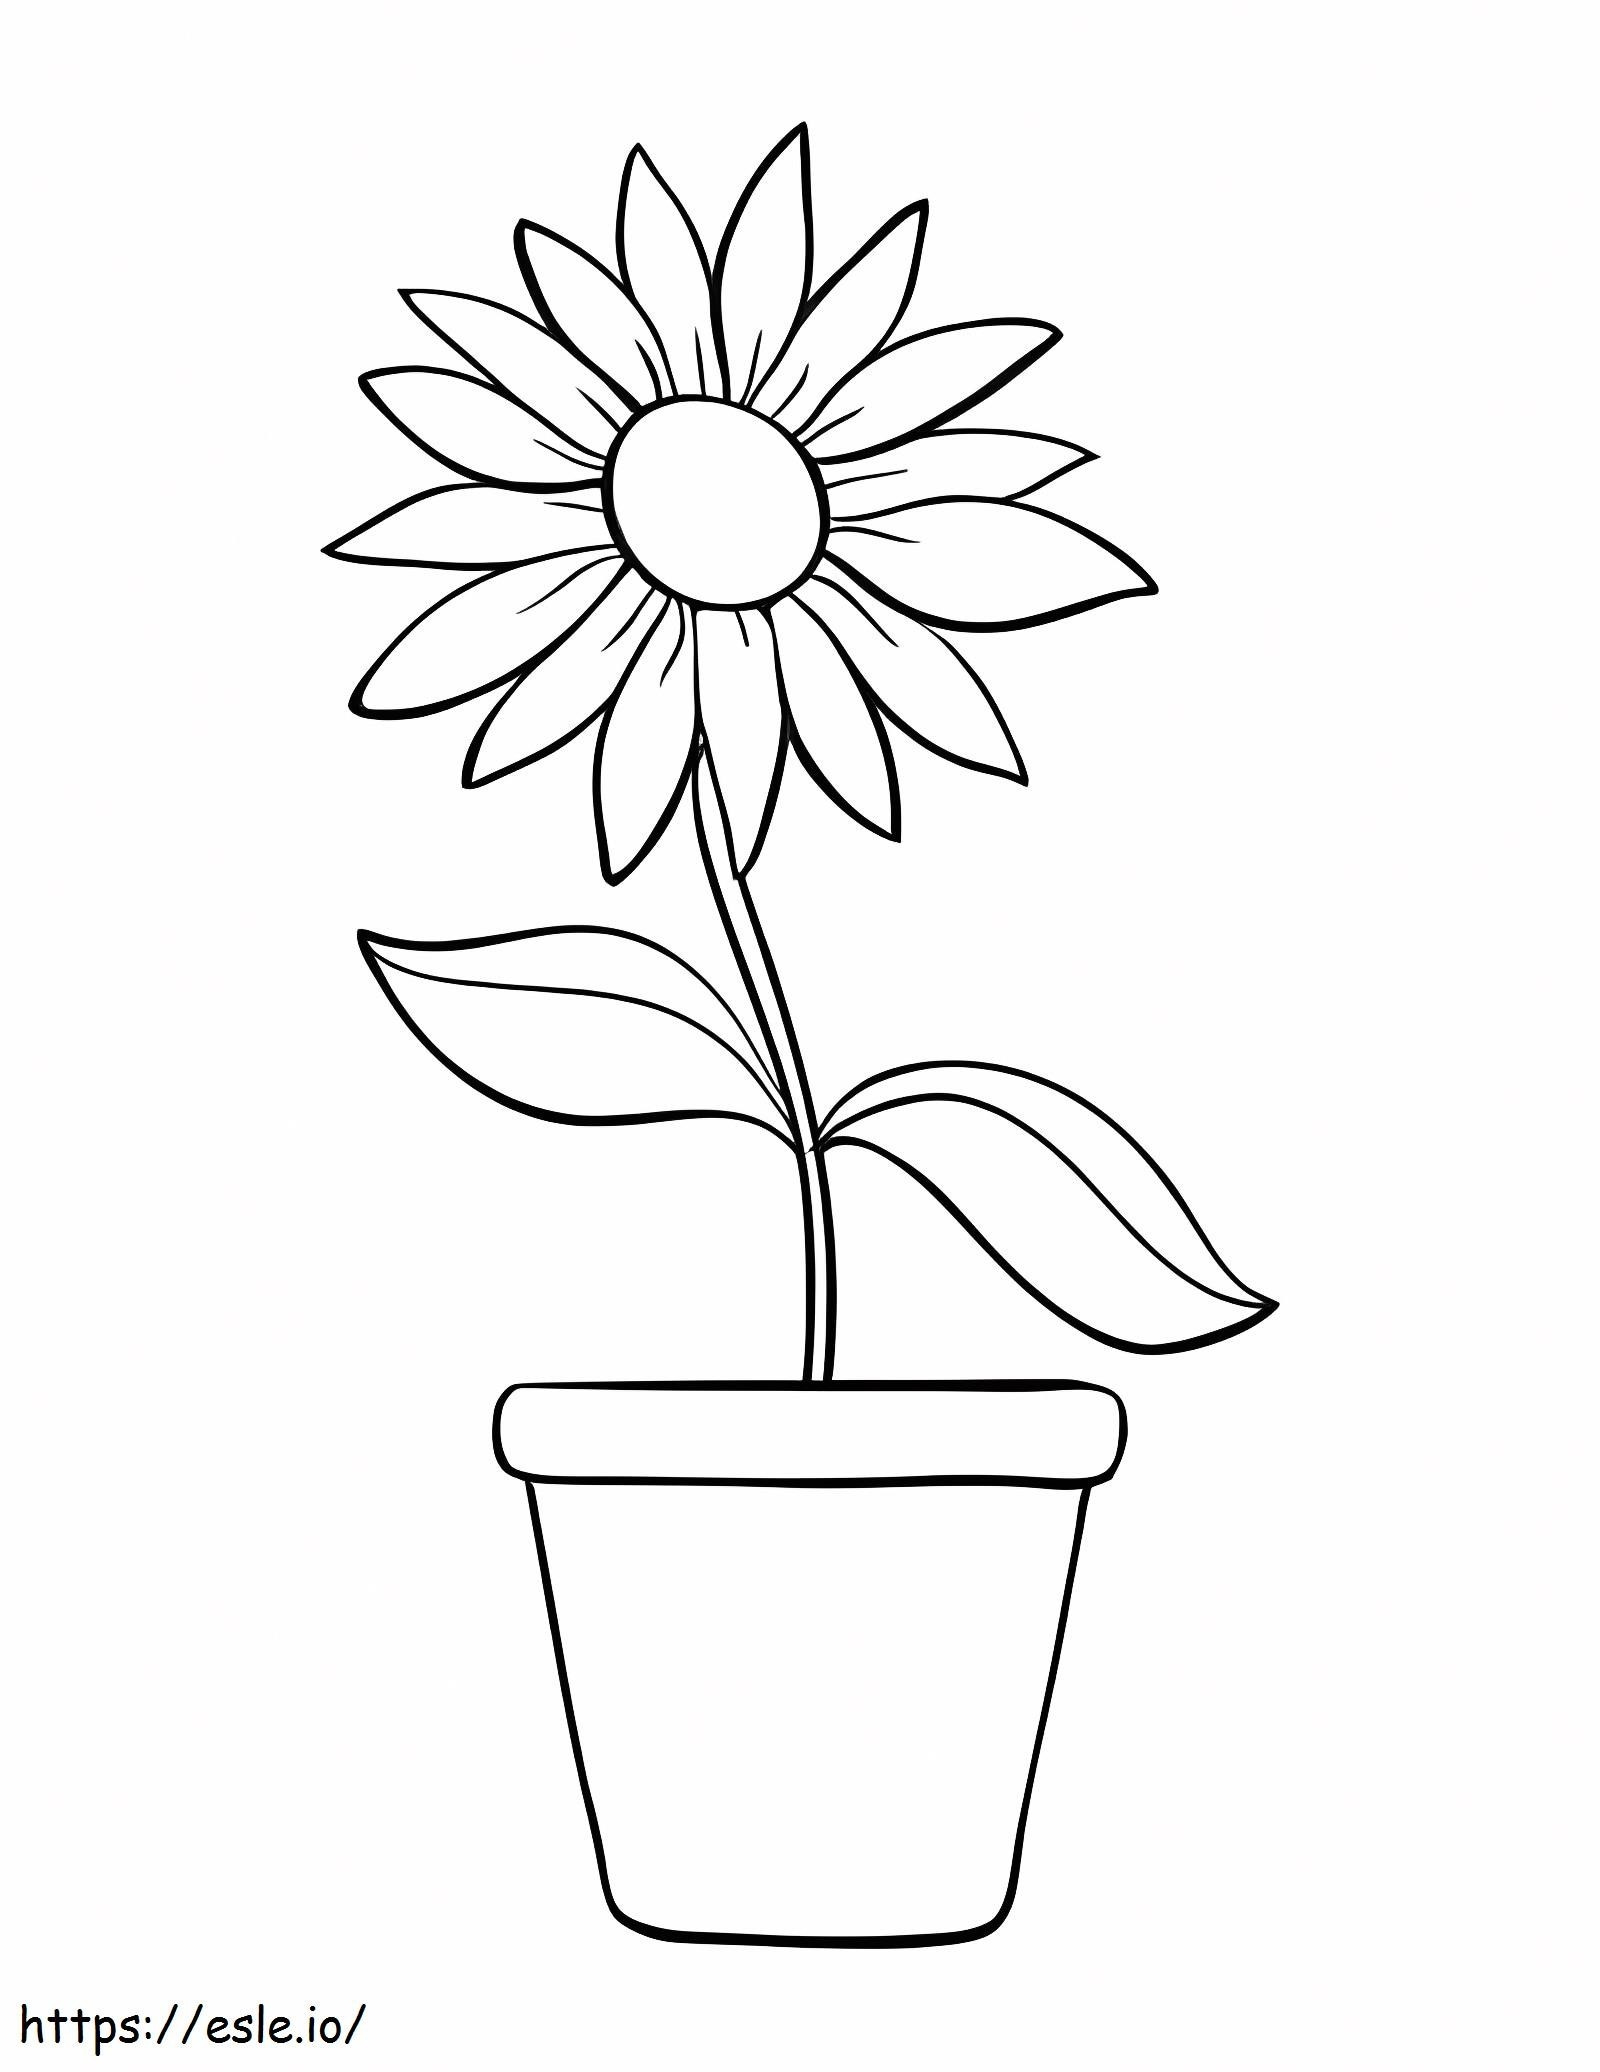 Sunflower Pot coloring page